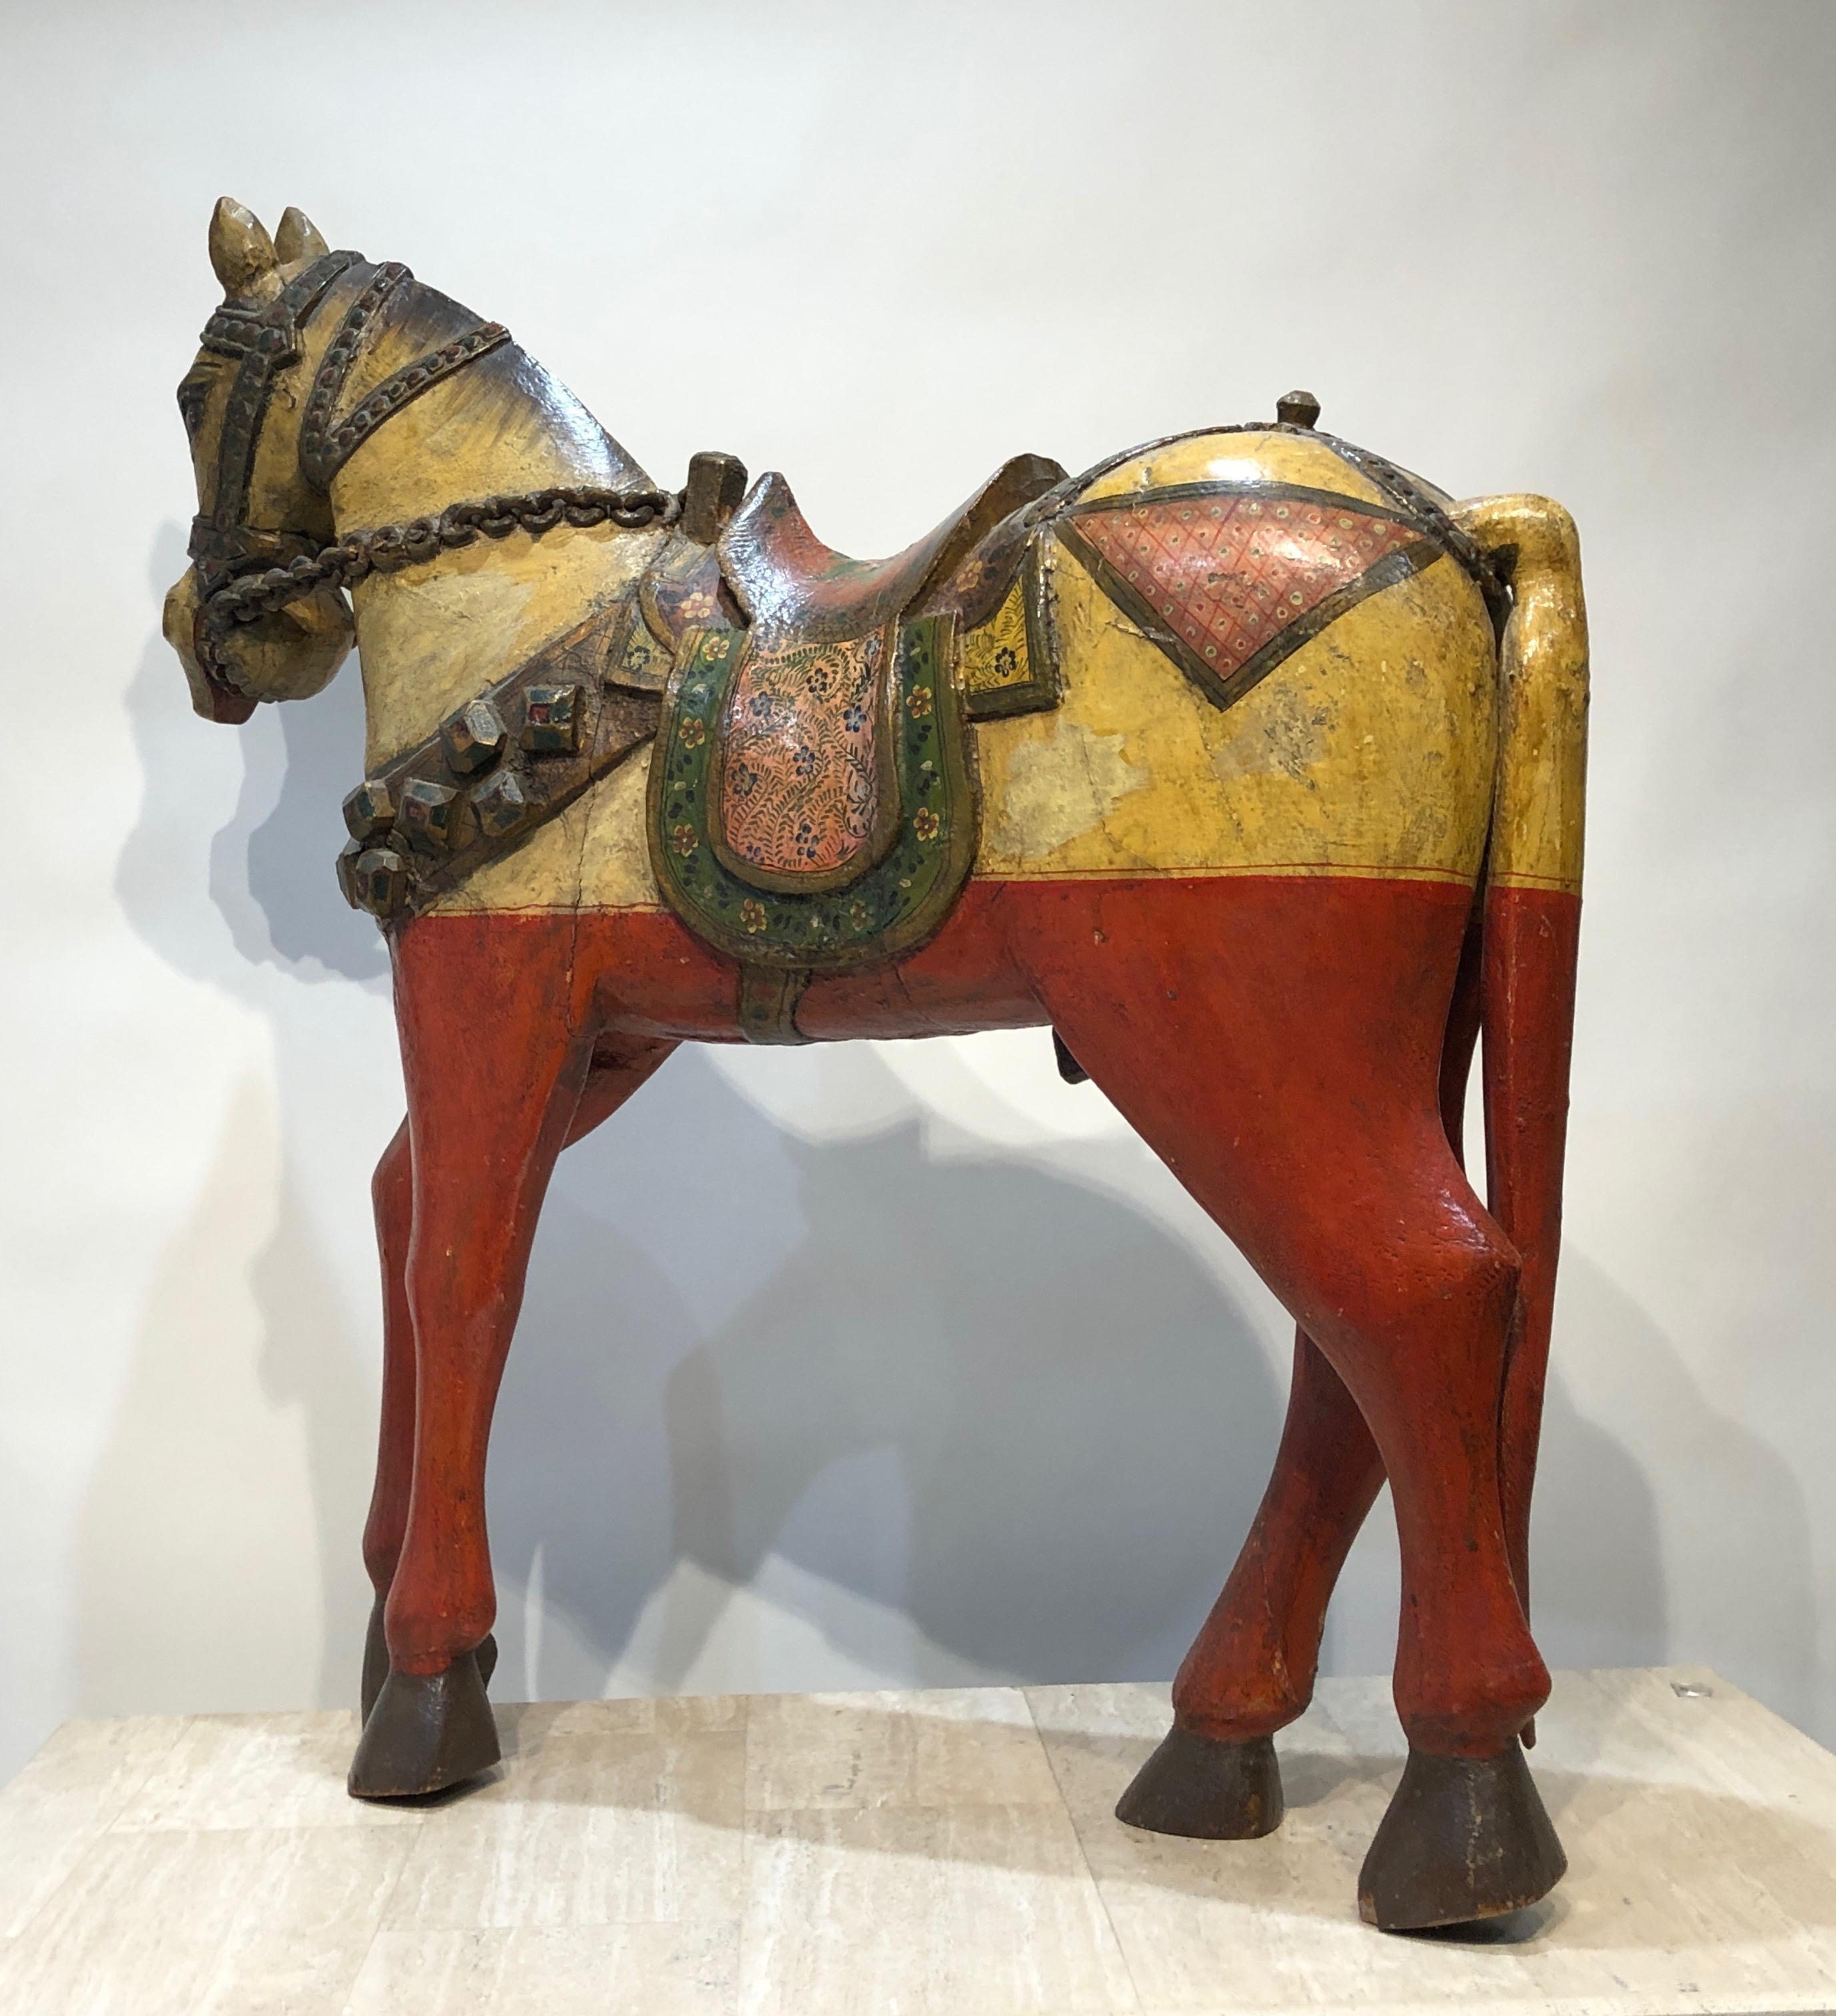 Antique Indonesian Horse, yellow, red, sculpture, free-standing, vintage, walking

Some wear on paint and crack that has been repaired. 